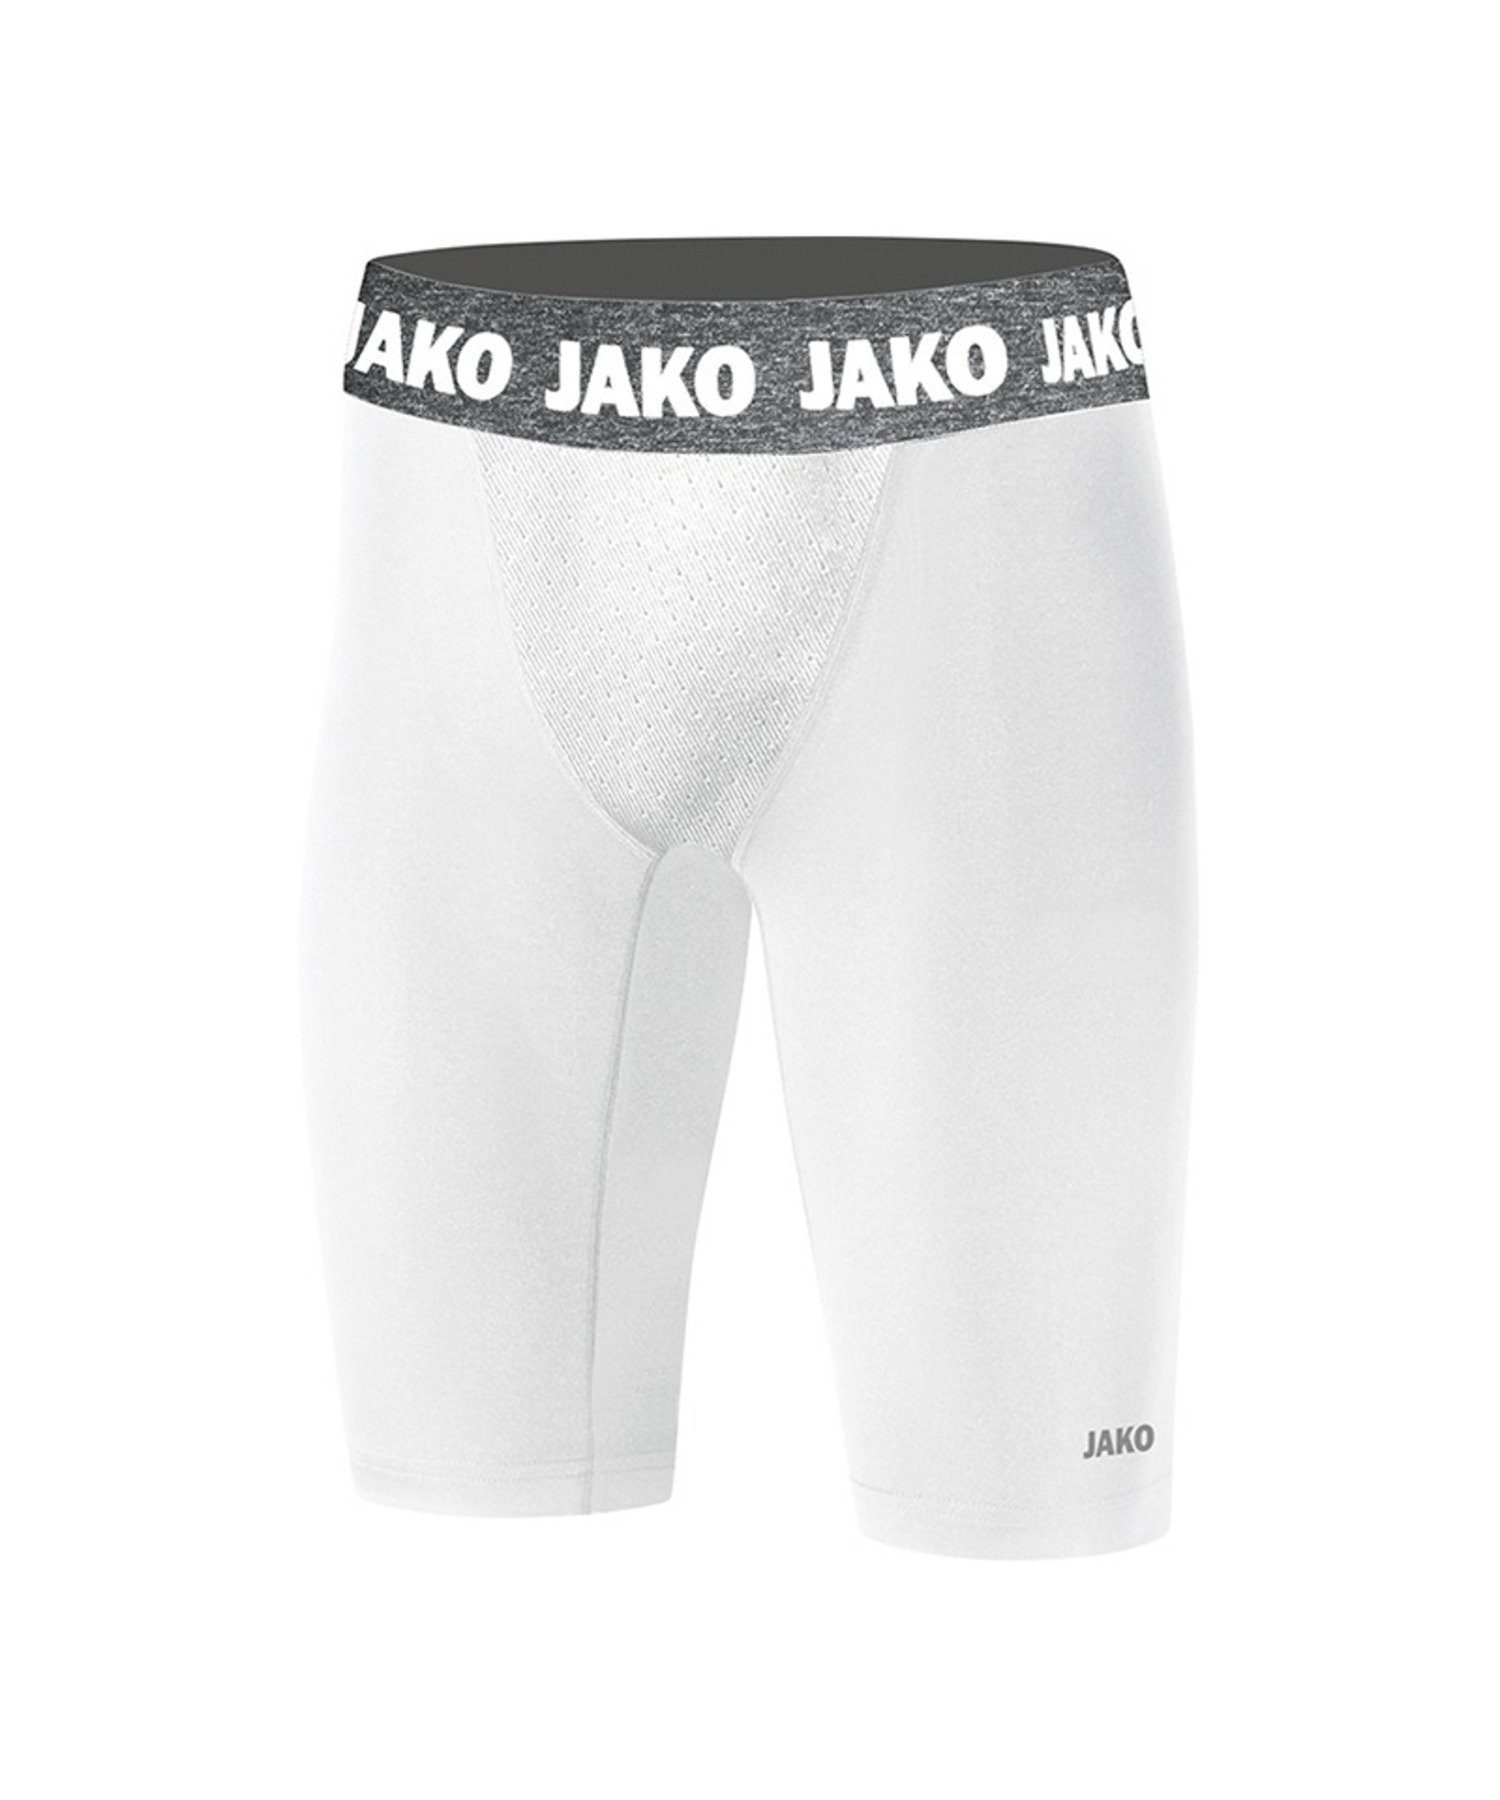 weiss Funktionshose Short 2.0 Jako Compression Tight